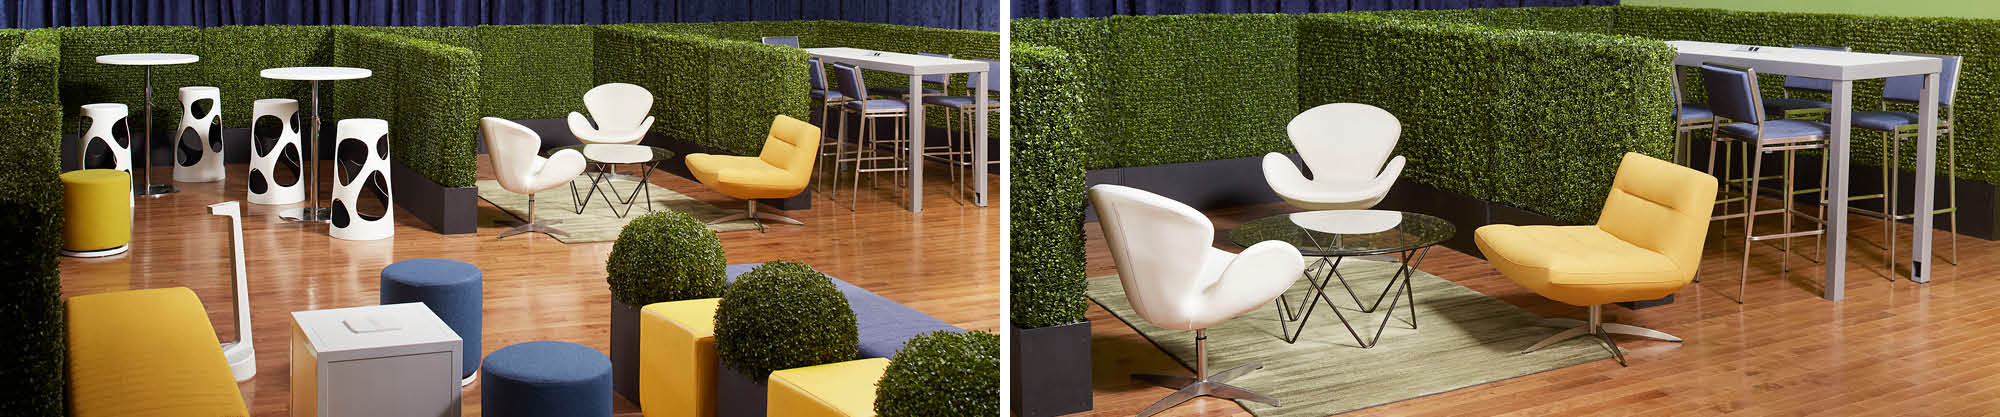 breakout session layout with faux greenery hedges